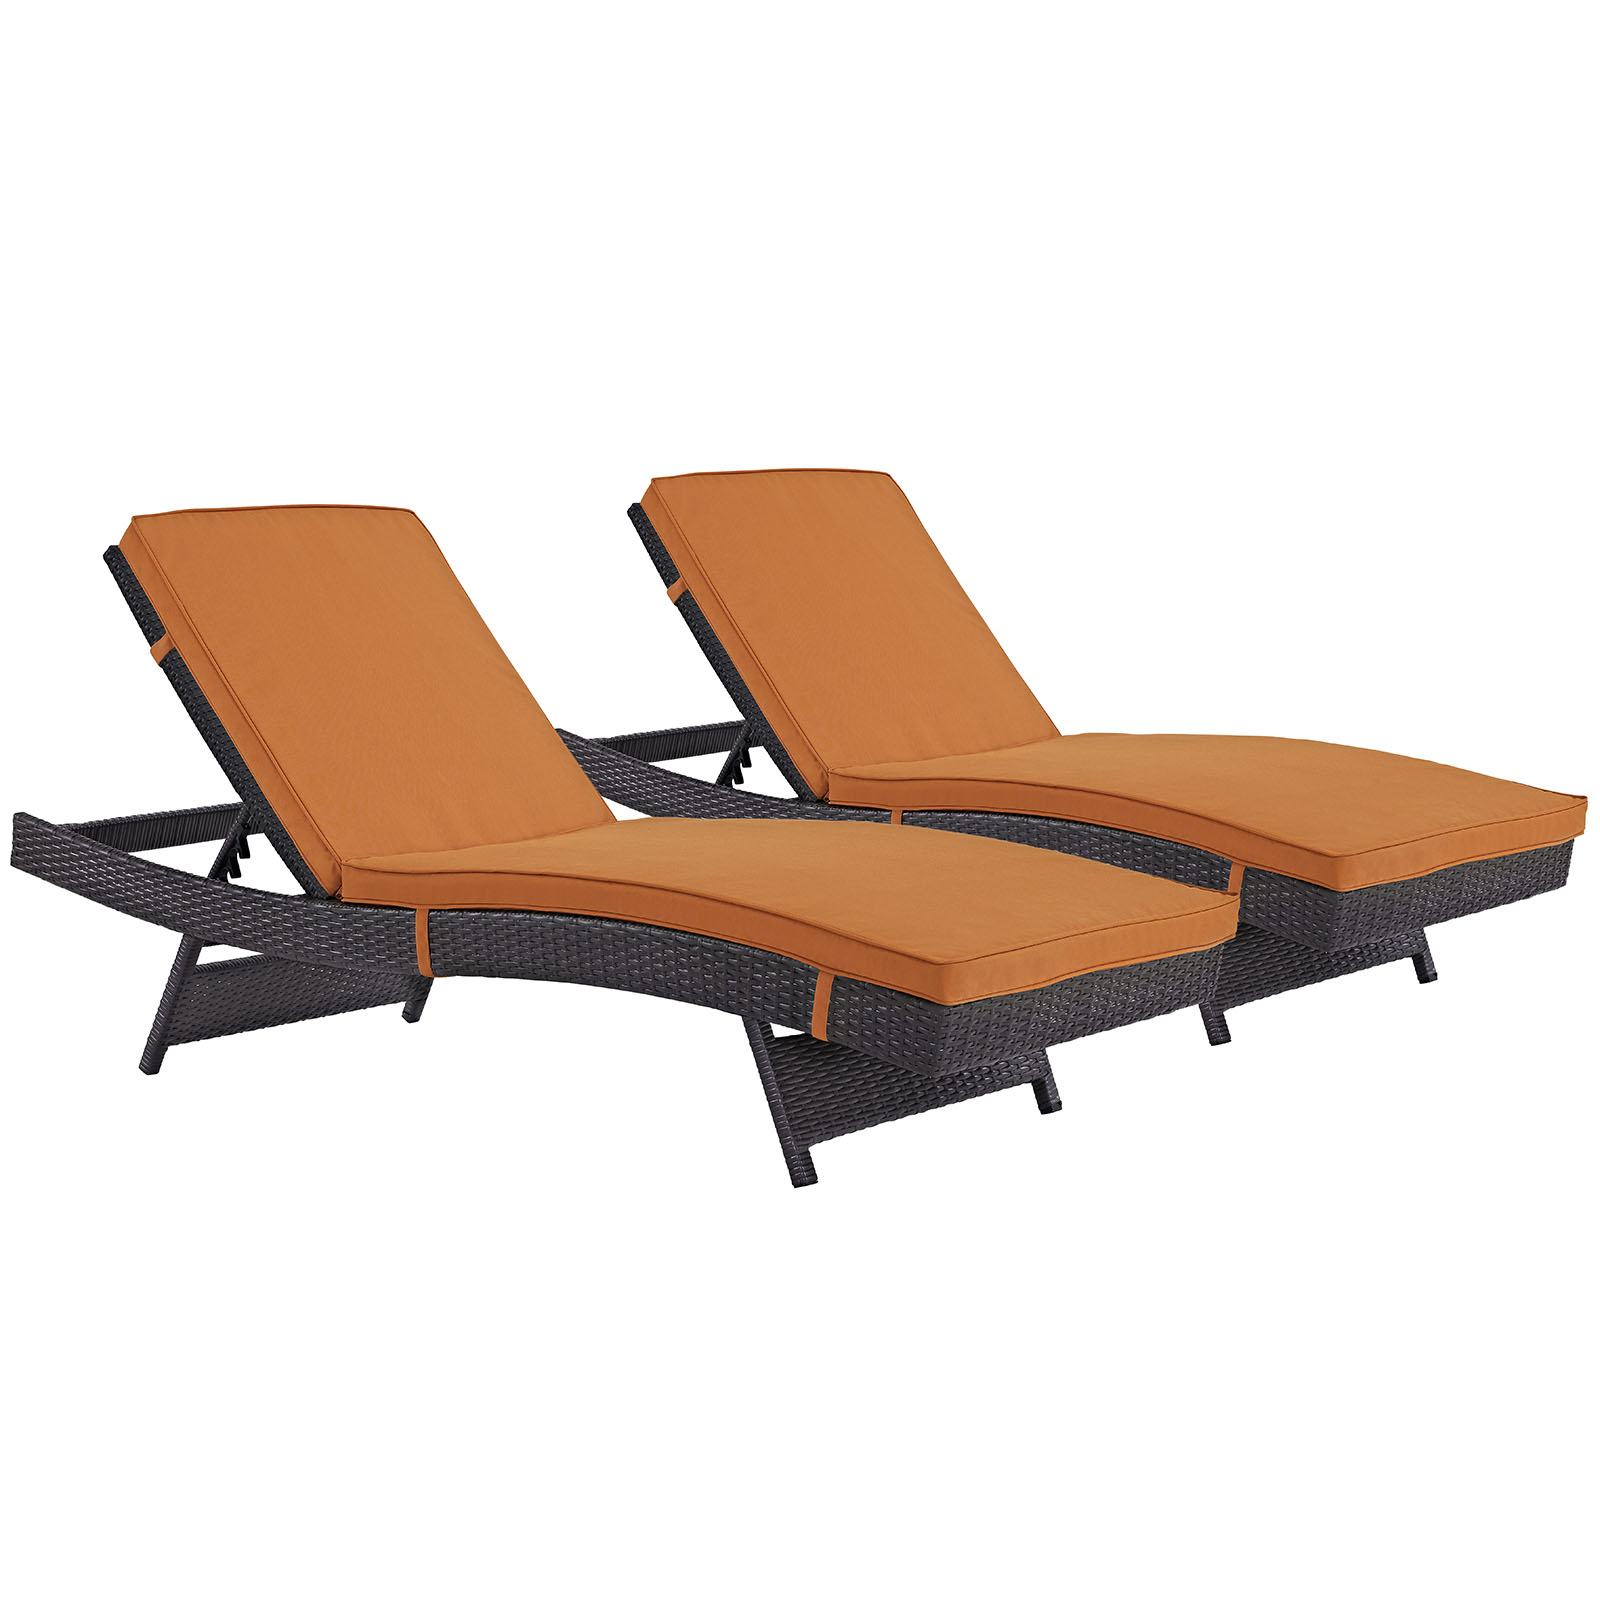 Modern Contemporary Urban Design Outdoor Patio Balcony Chaise Lounge Chair ( Set of 2), Orange, Rattan - image 1 of 4